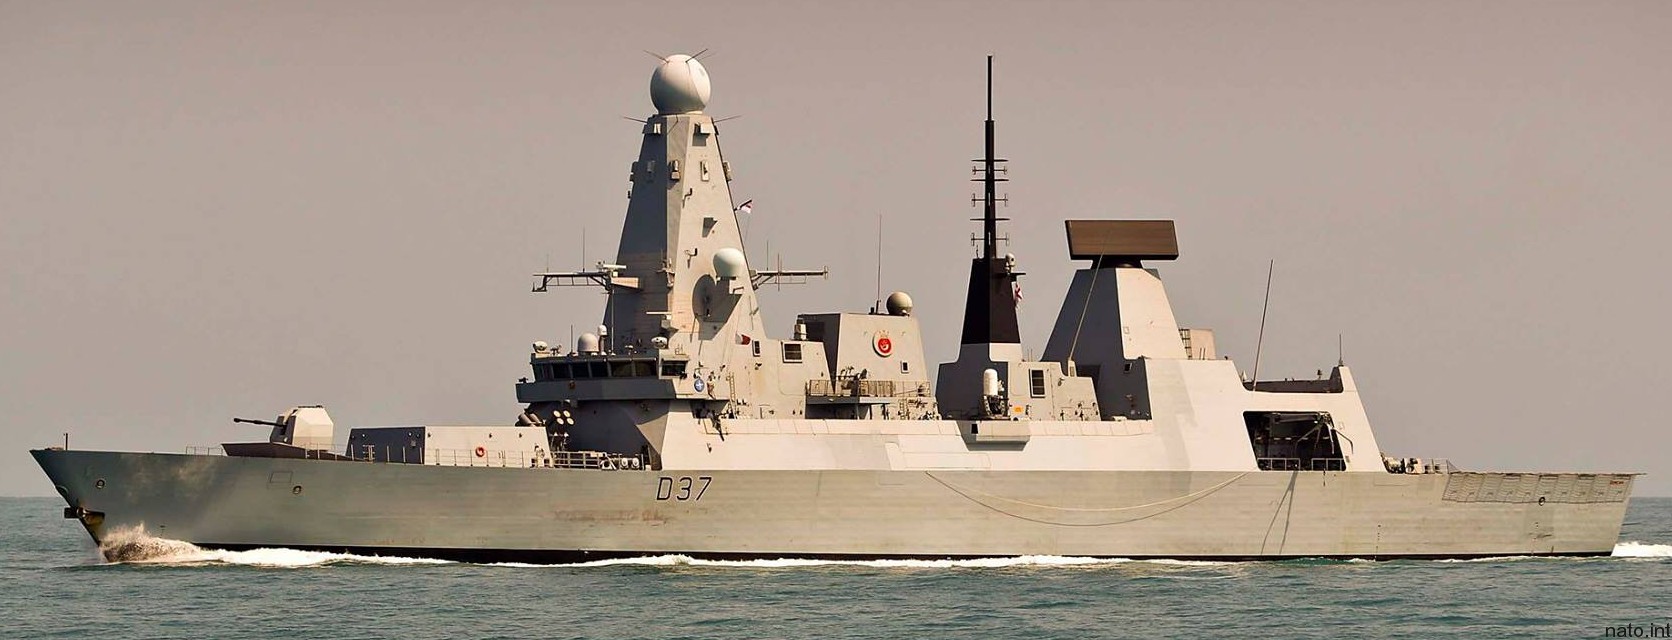 d37 hms duncan d-37 type 45 daring class guided missile destroyer ddg royal navy sea viper 28